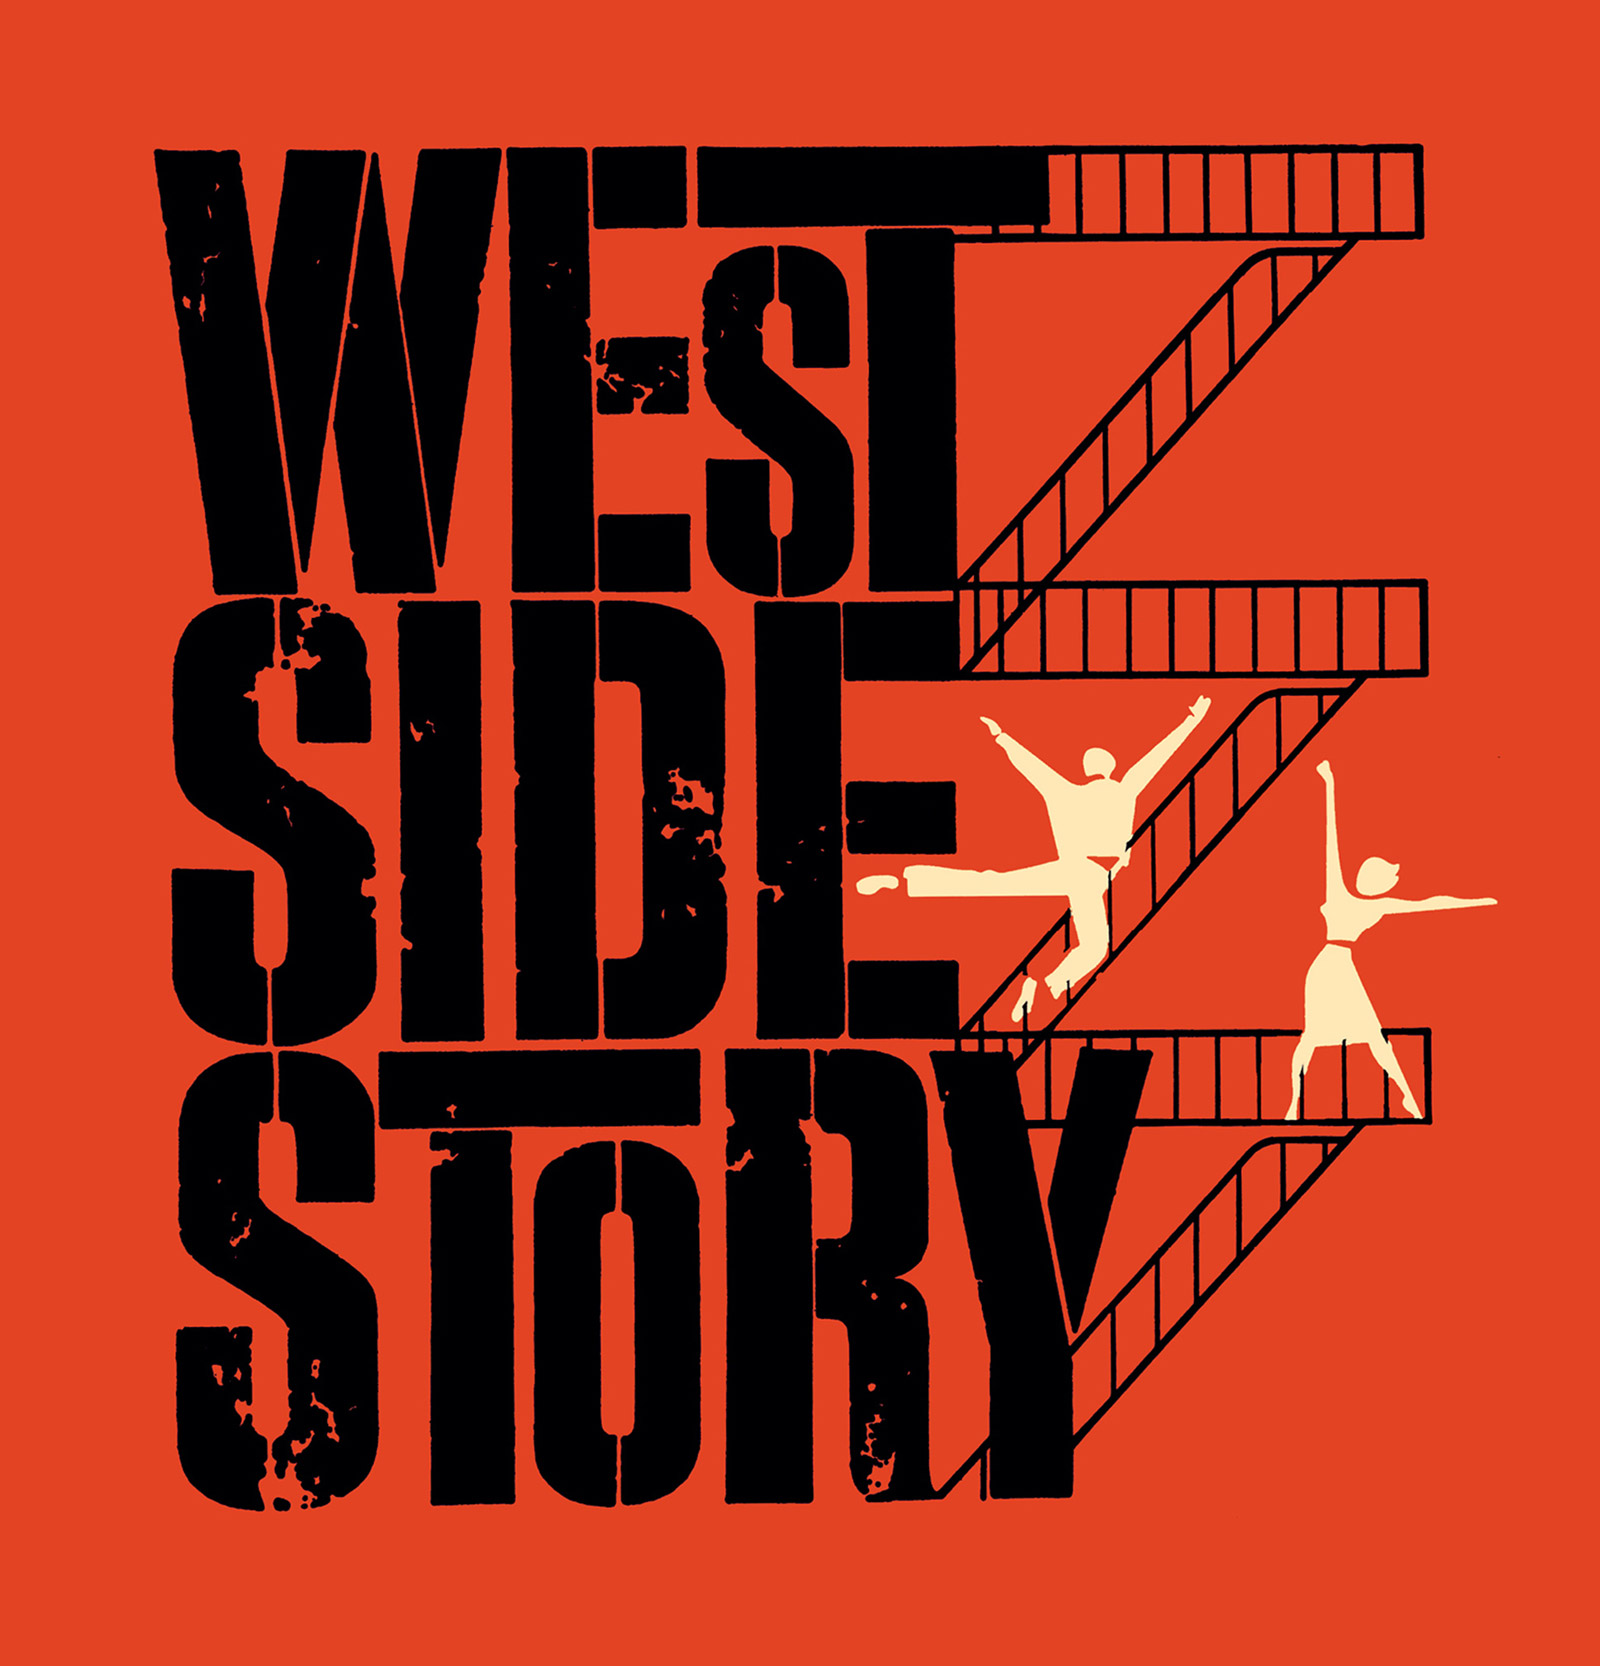 The iconic image designed by Saul Bass for the film version of West Side Story (1961).